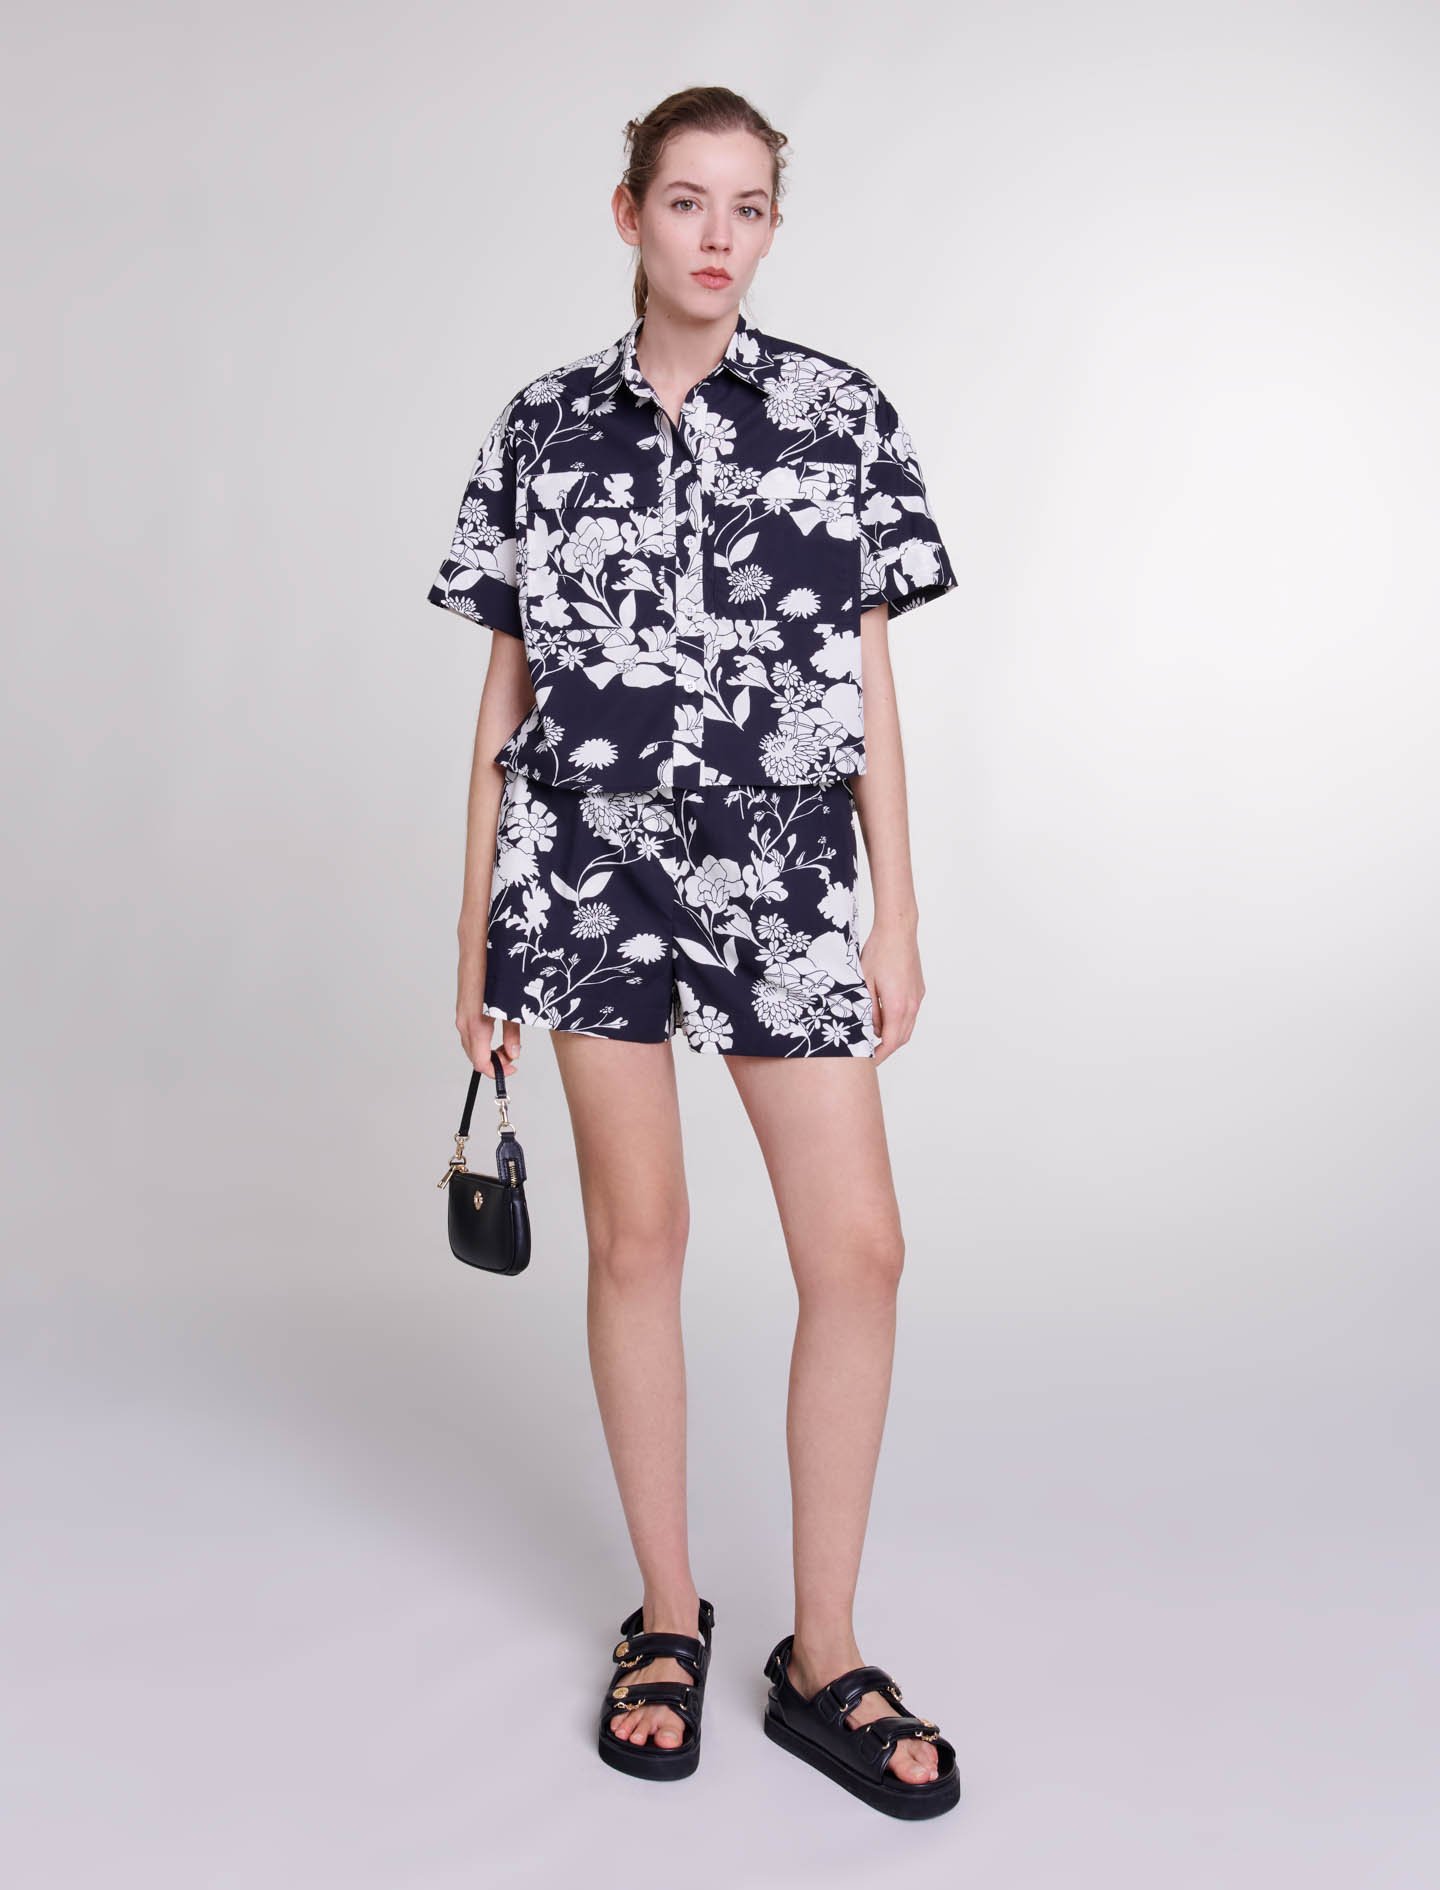 Maje Woman's cotton Patterned cropped shirt for Spring/Summer, in color Floral ecru black print /